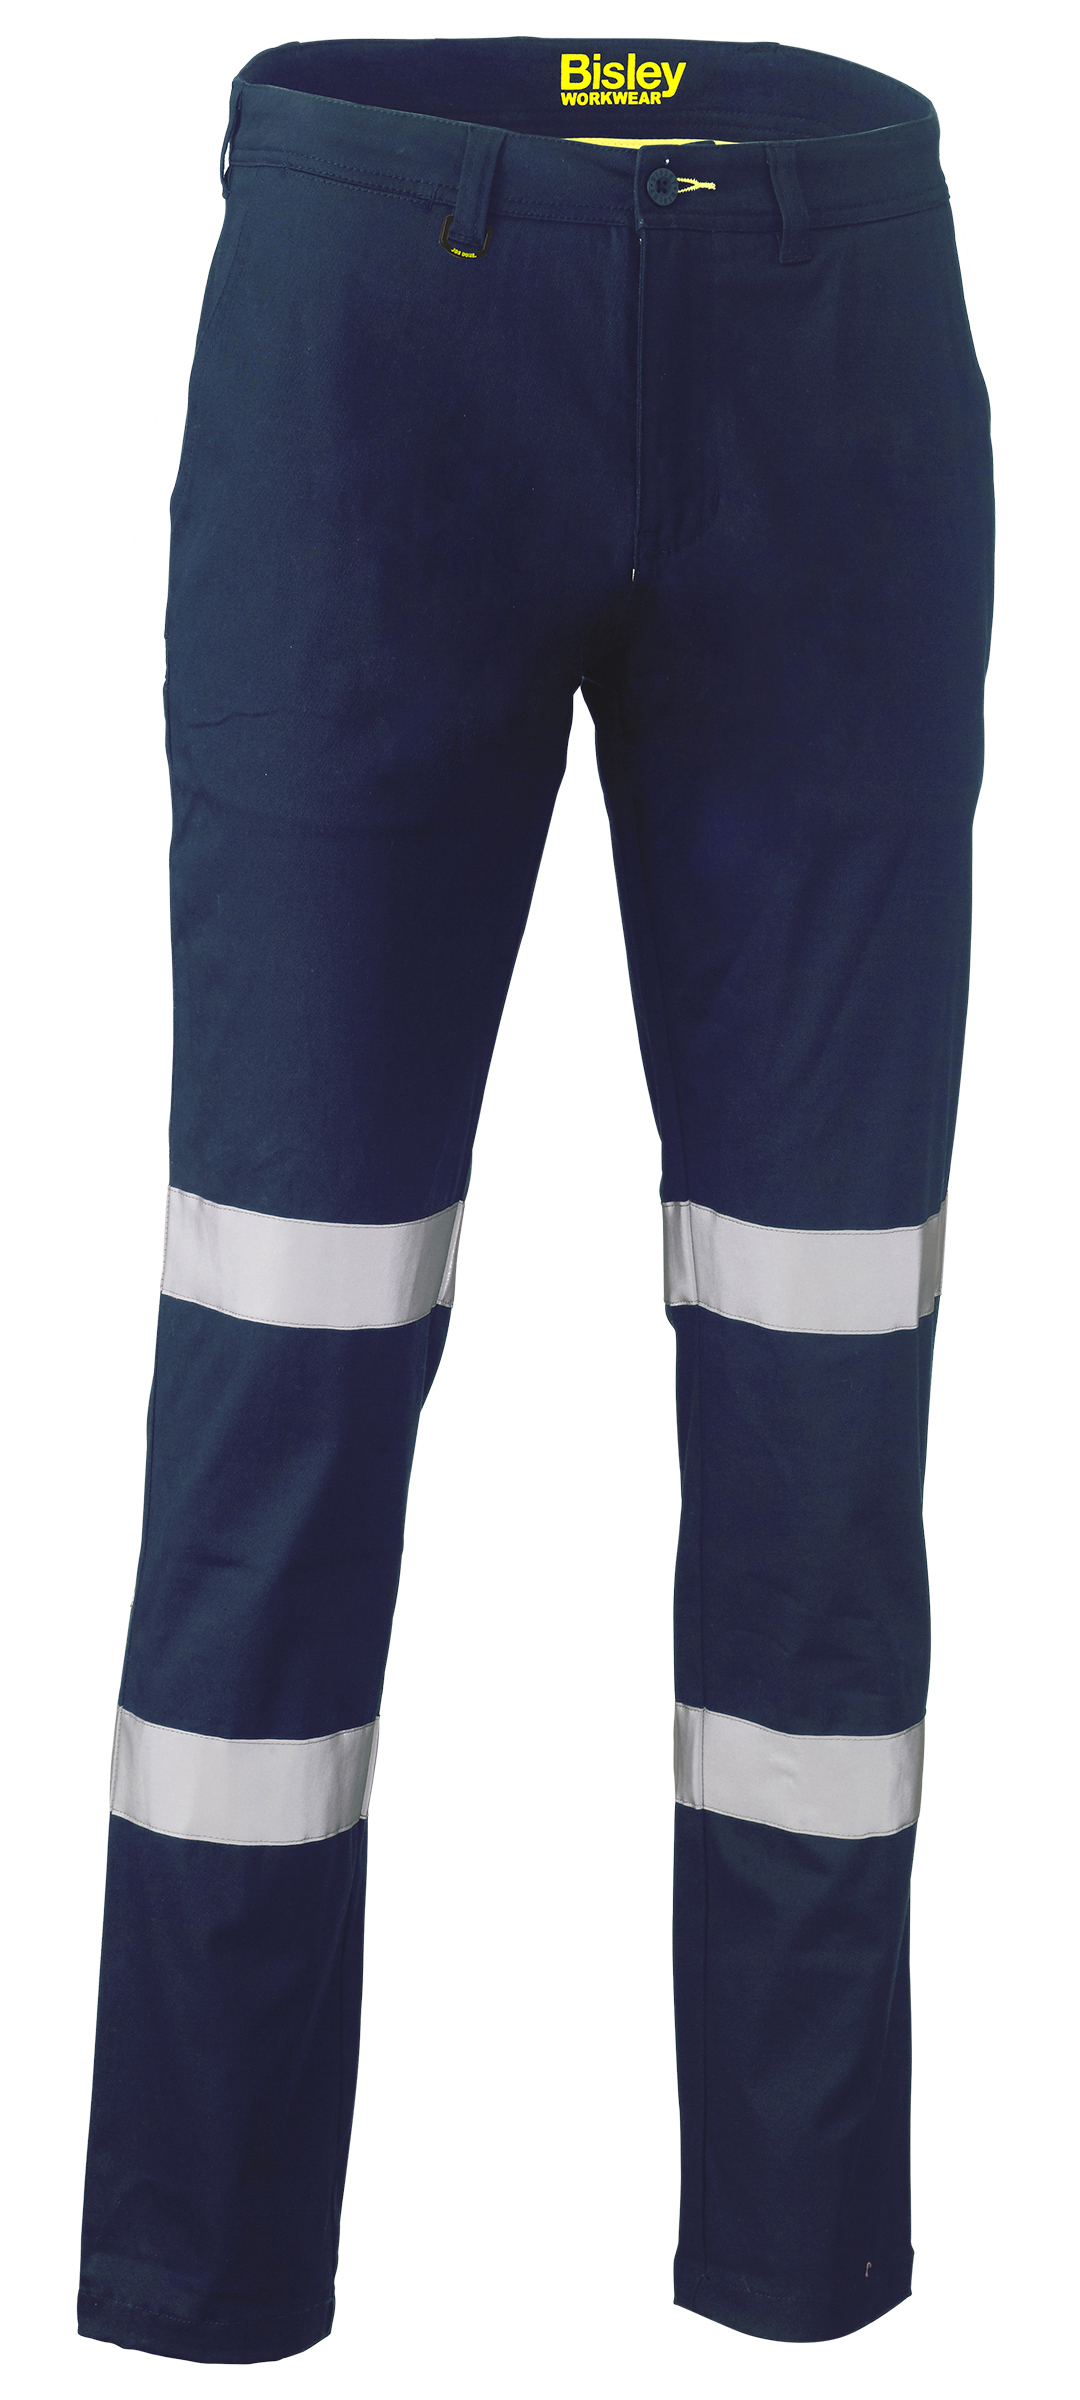 PANT BIOMOTION TAPED NAVY 102R -STRETCH COTTON DRILL